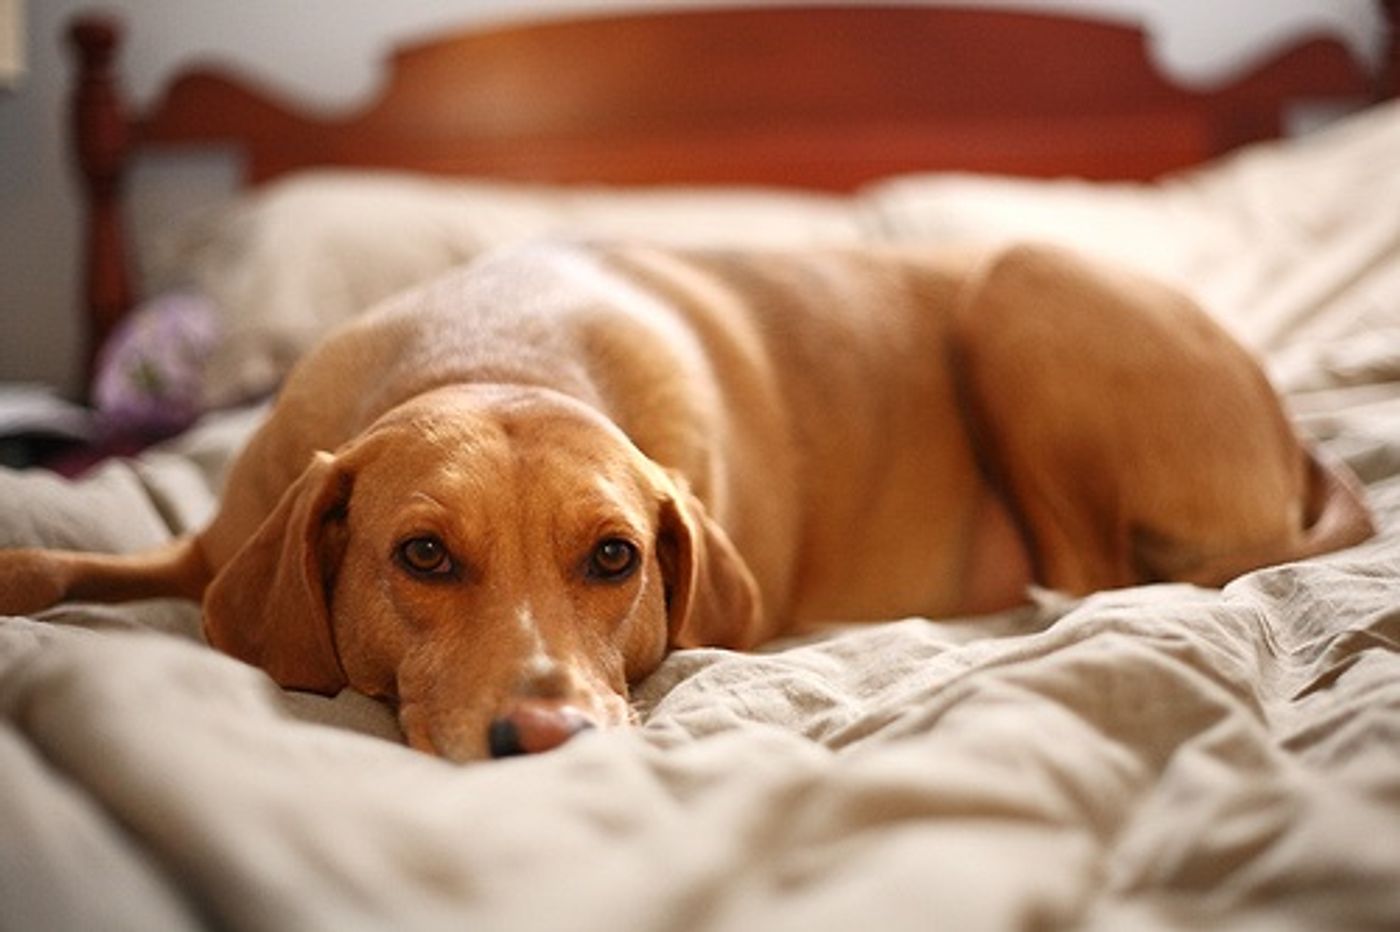 Pets may be beneficial to sleep, depending on who you are, of course.